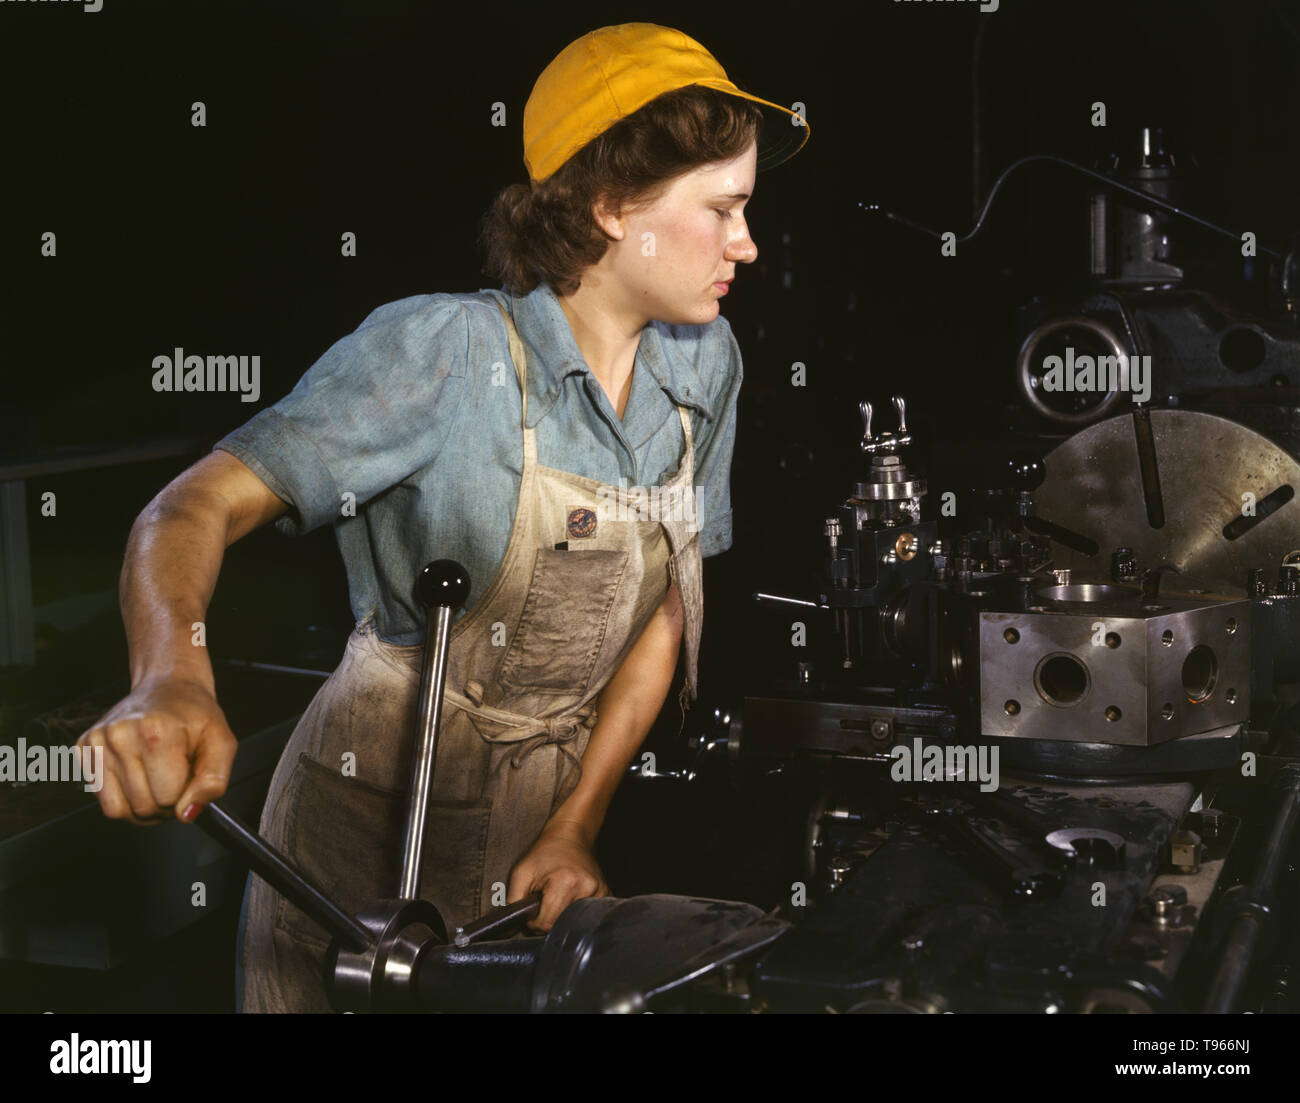 Lathe operator machining parts for transport planes at the Consolidated Aircraft Corporation plant, Fort Worth, Texas. Although the image of 'Rosie the Riveter' reflected the industrial work of welders and riveters, the majority of working women filled non-factory positions in every sector of the economy. What unified the experiences of these women was that they proved to themselves, and the country, that they could do a man's job and could do it well. Photographed by Howard R. Hollem, 1942. Stock Photo